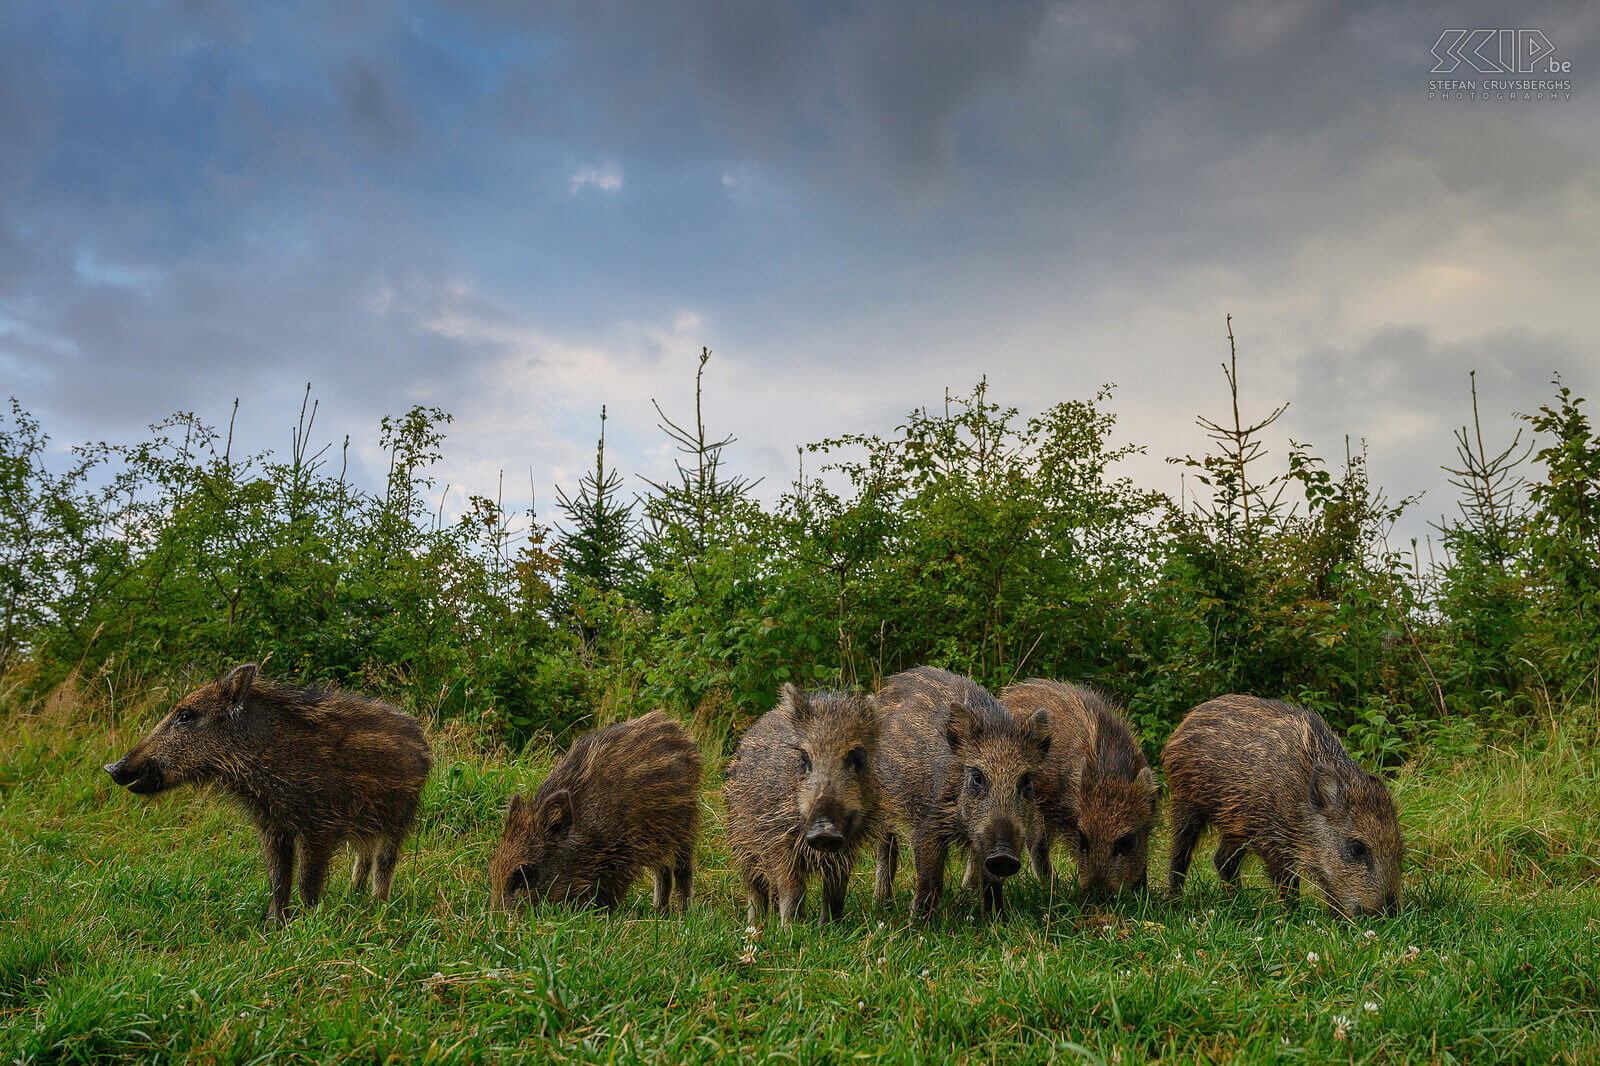 Wild boars This summer I went three times to the Belgian Ardennes an observation hut on the Plateau des Tailles near Baraque de Fraiture to photograph wild animals. Armed with my camera and short telephoto lens and a wide-angle camera that I could remotely control, I was able to take a varied series of images of the wild boars. A small group of young pigs often showed up before sunset. The big family with heavy boars and sows and also young squeakers usually only came at dusk or when it was already dark.<br />
 Stefan Cruysberghs